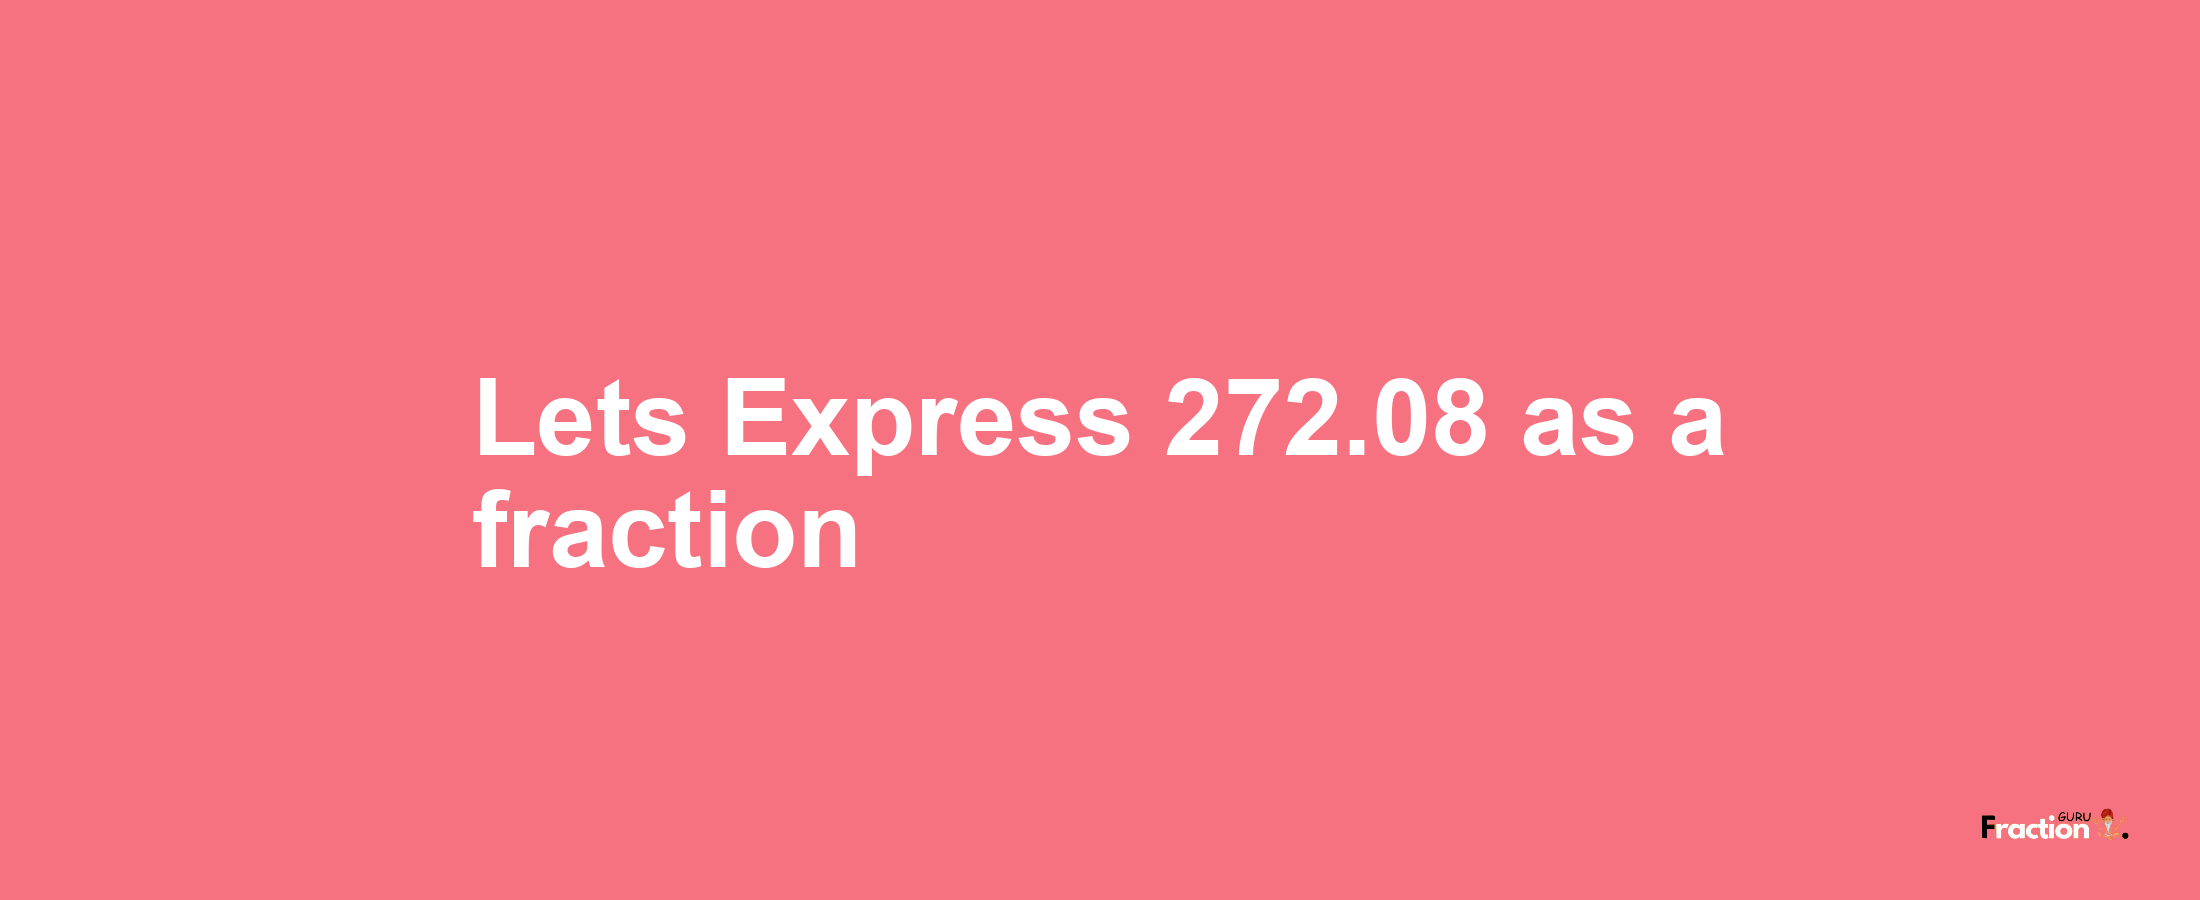 Lets Express 272.08 as afraction